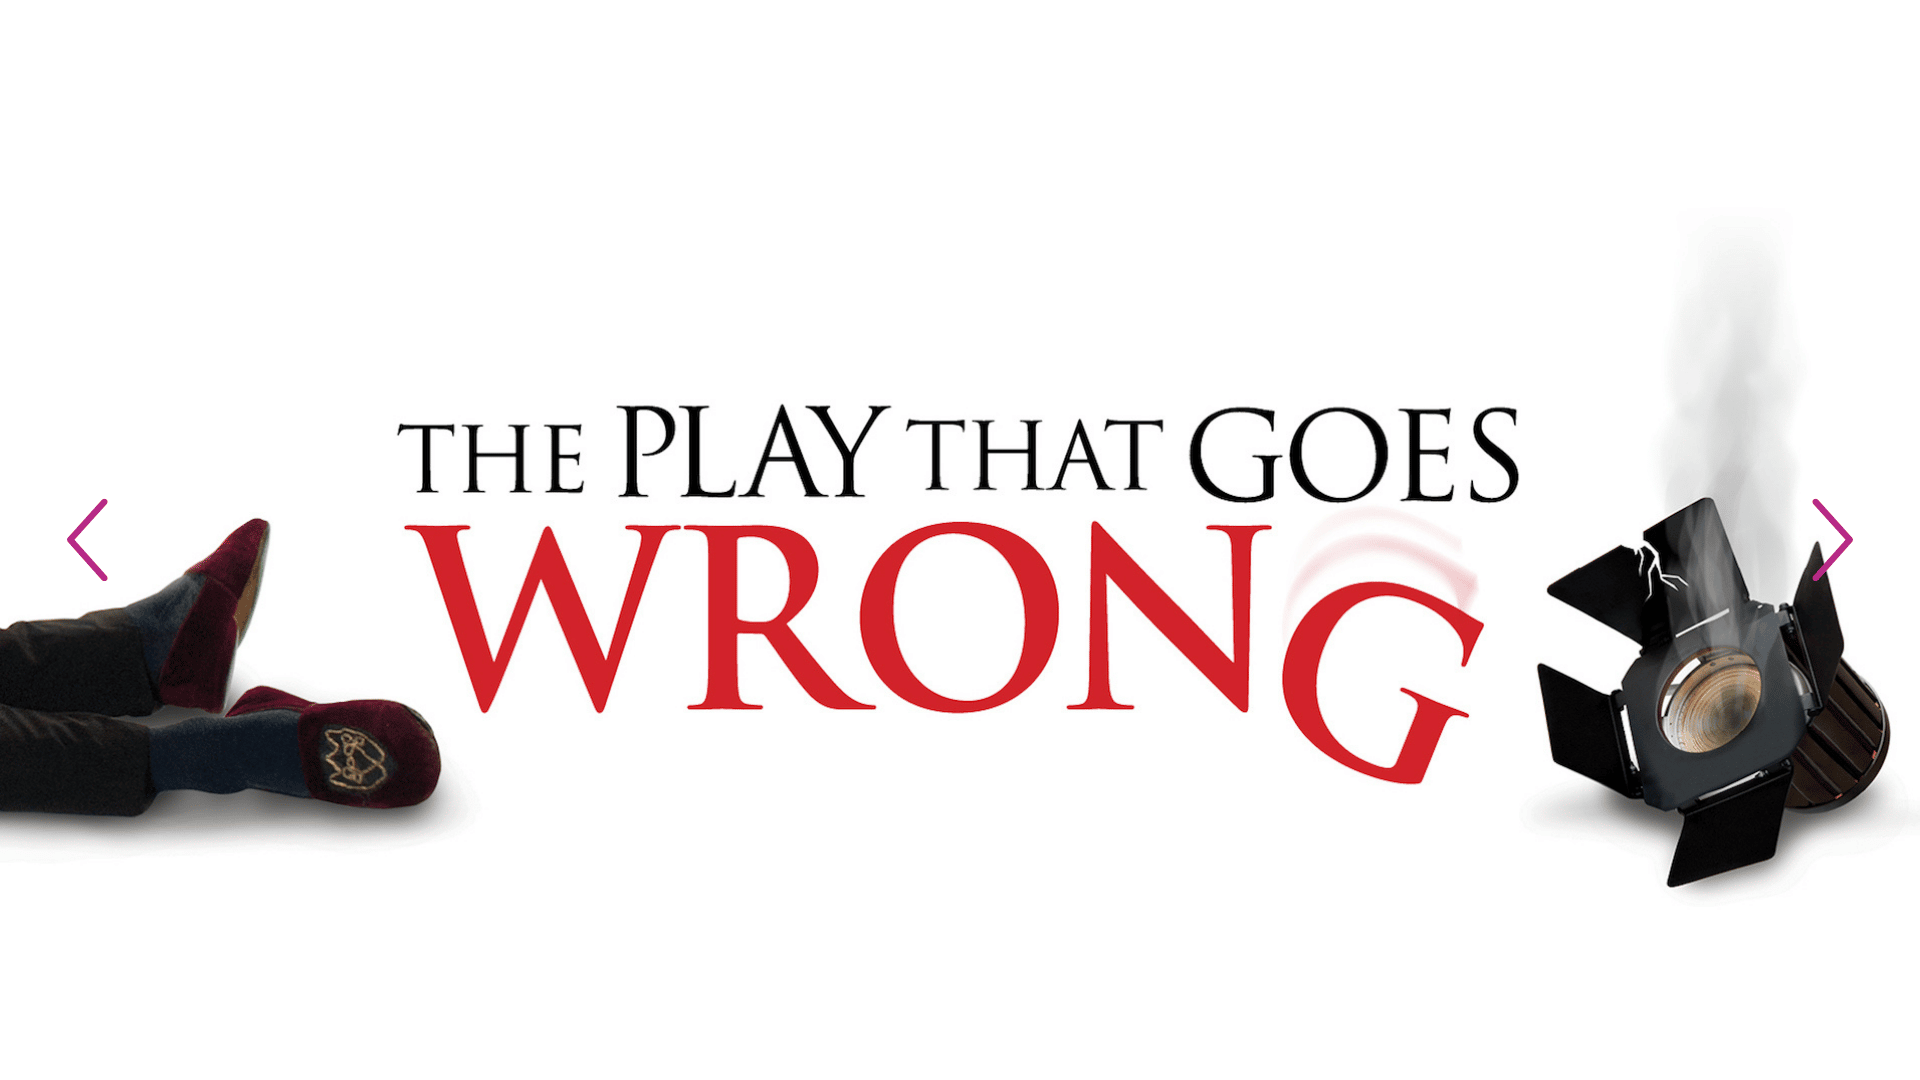 The Play That Goes Wrong title treatement. On one side of the titles is a broken theatre light, on the other, the legs and feet of a man who has clearly fallen over